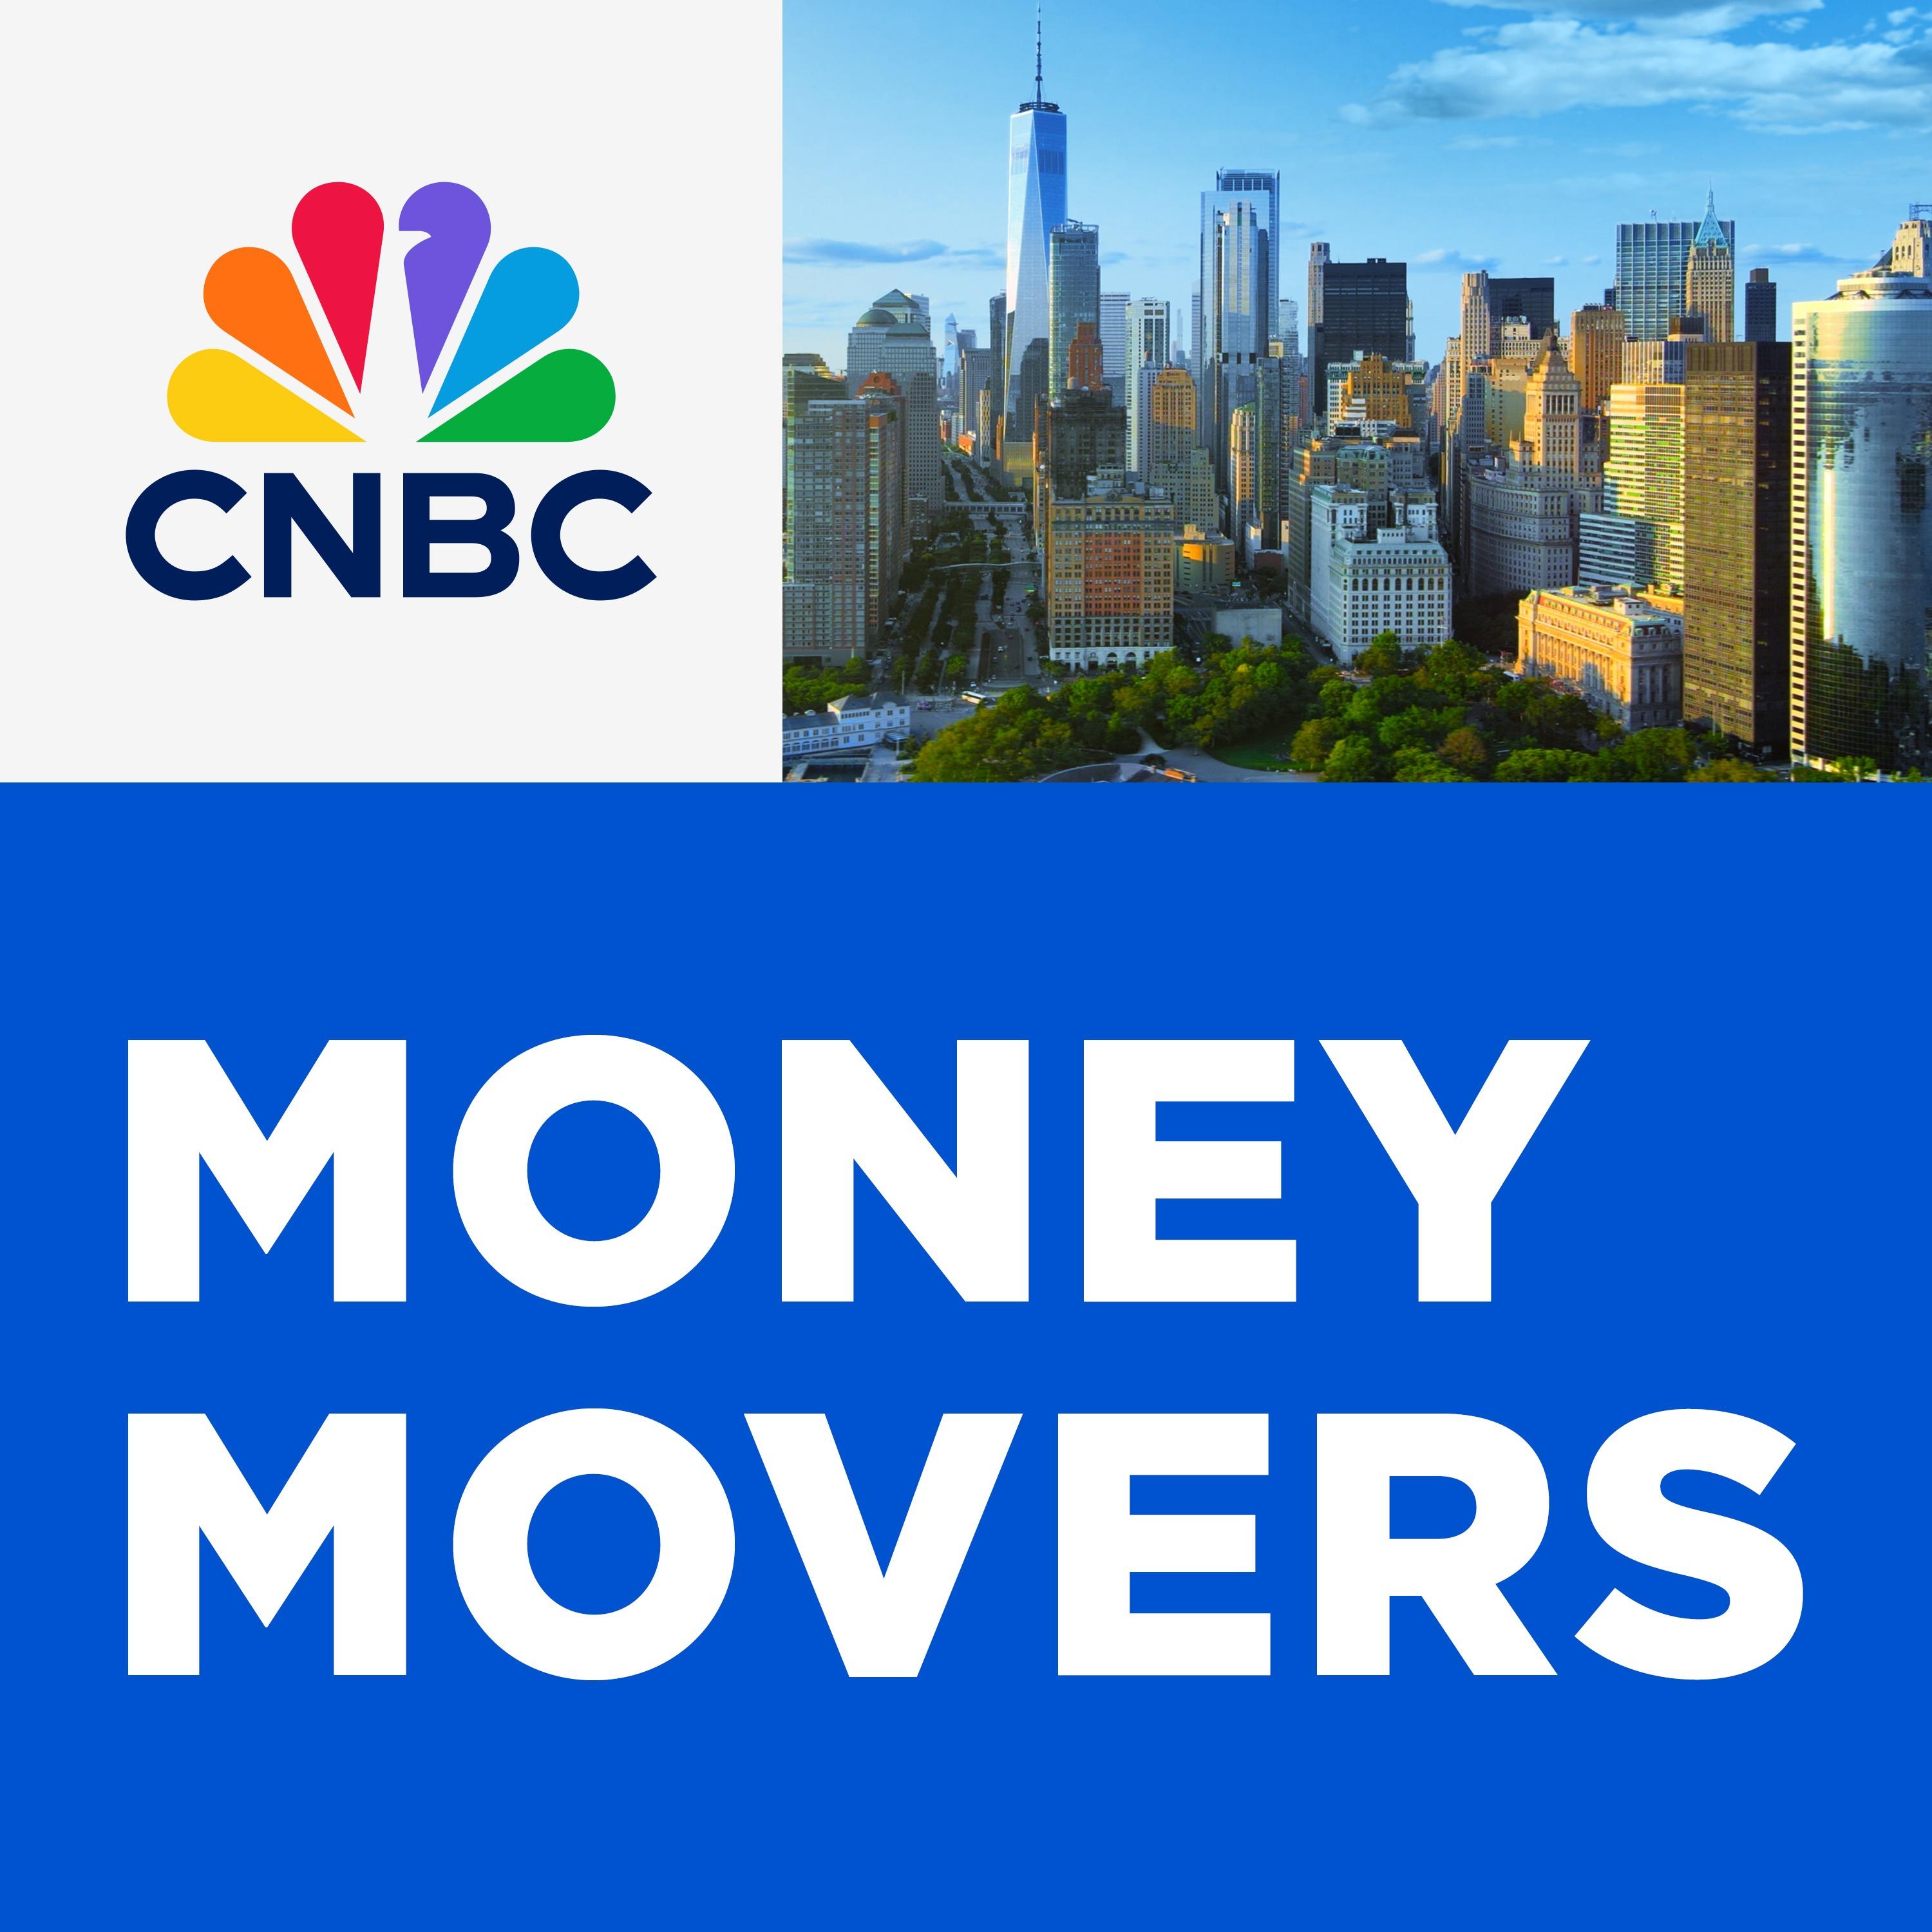 Show poster of CNBC’s “Money Movers”